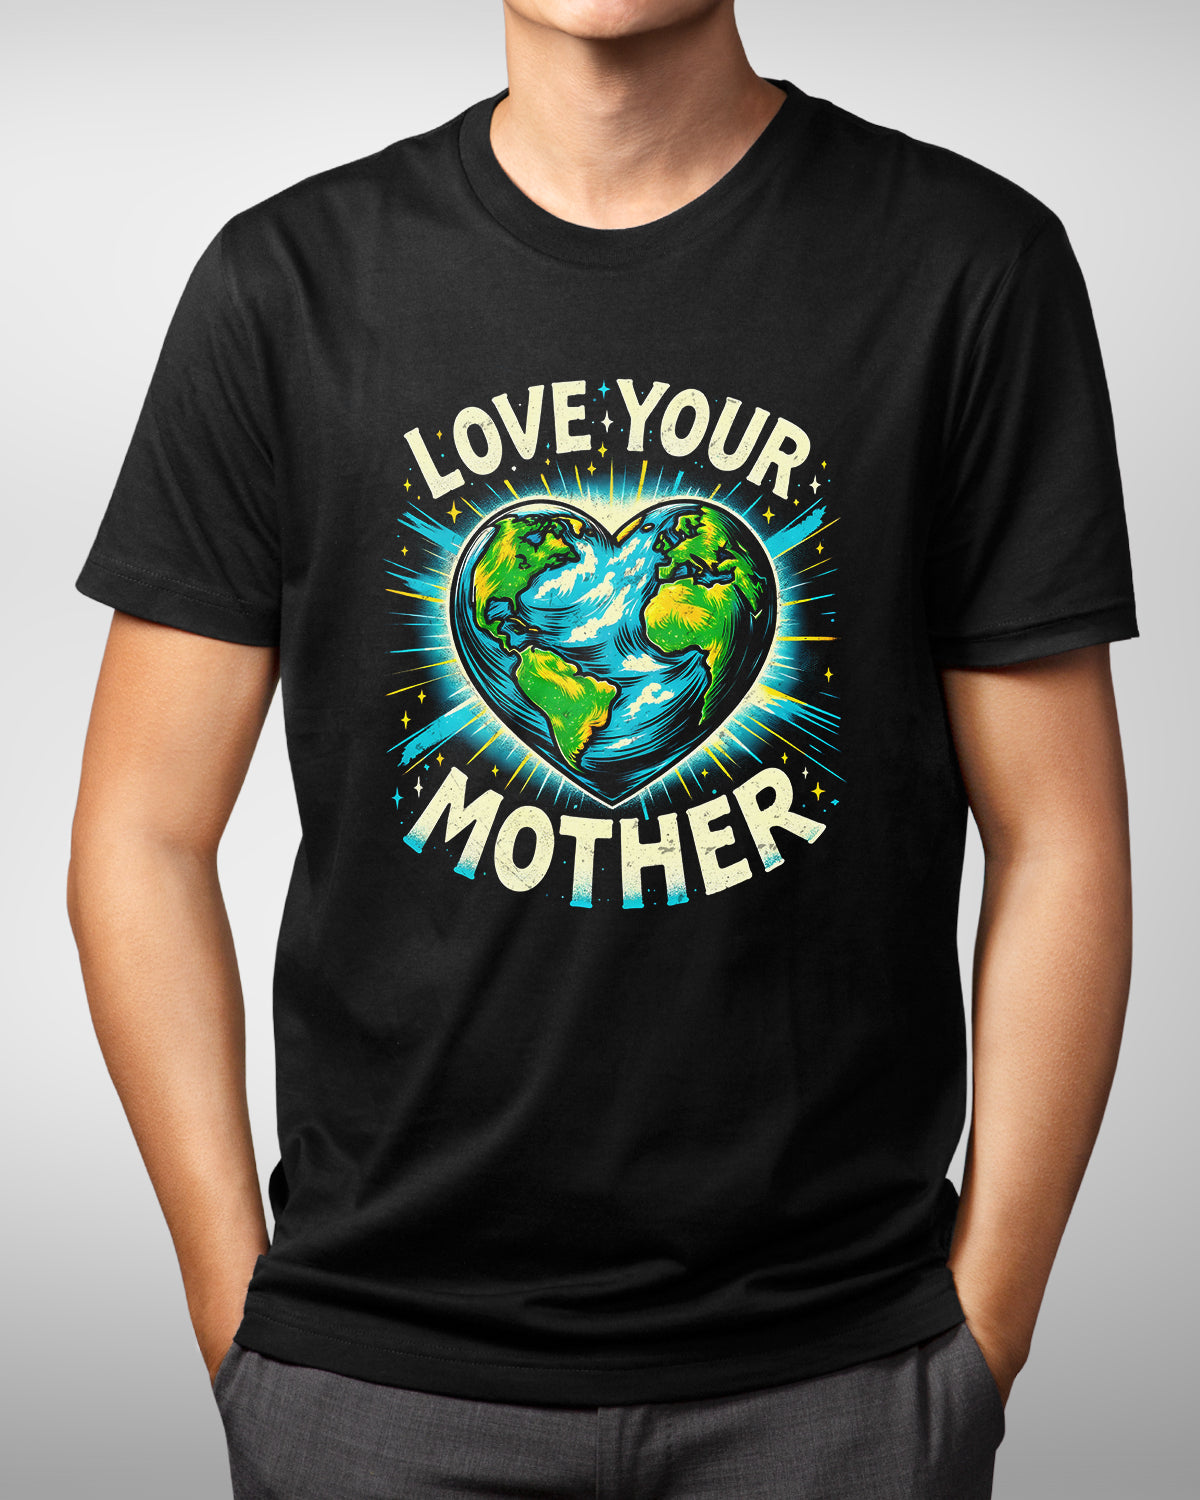 Love Your Mother Shirt, Heart Shaped Earth Tee, Celebrate Mother Earth Every Day, Environmental Awareness, Save the Planet